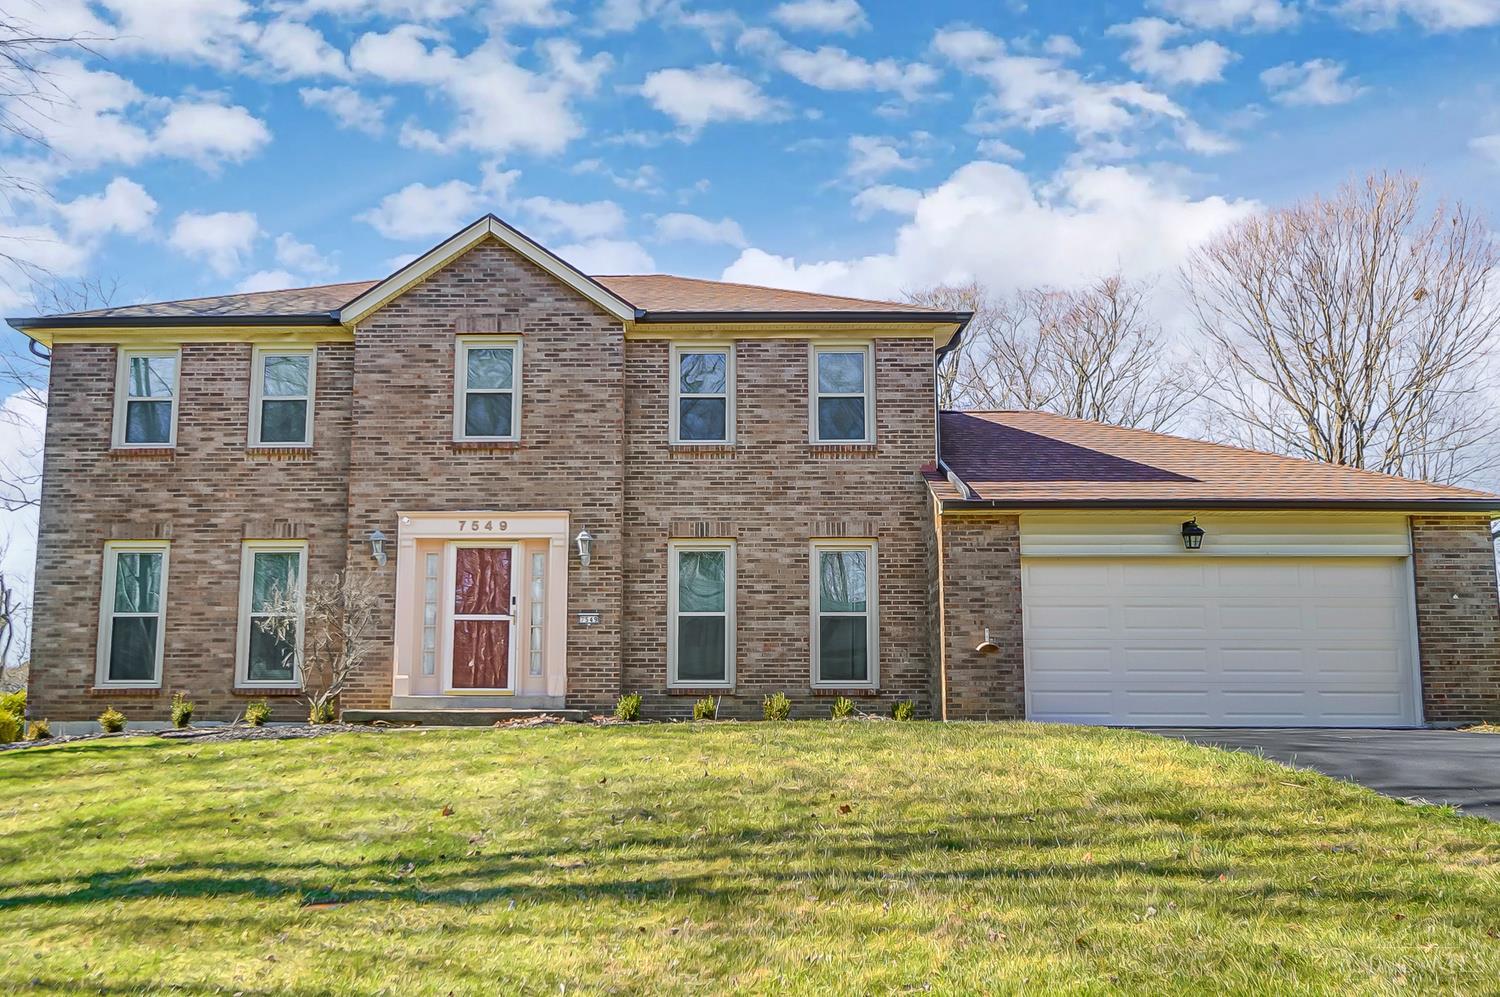 7549 Hidden Trace Dr, West Chester, OH 45069